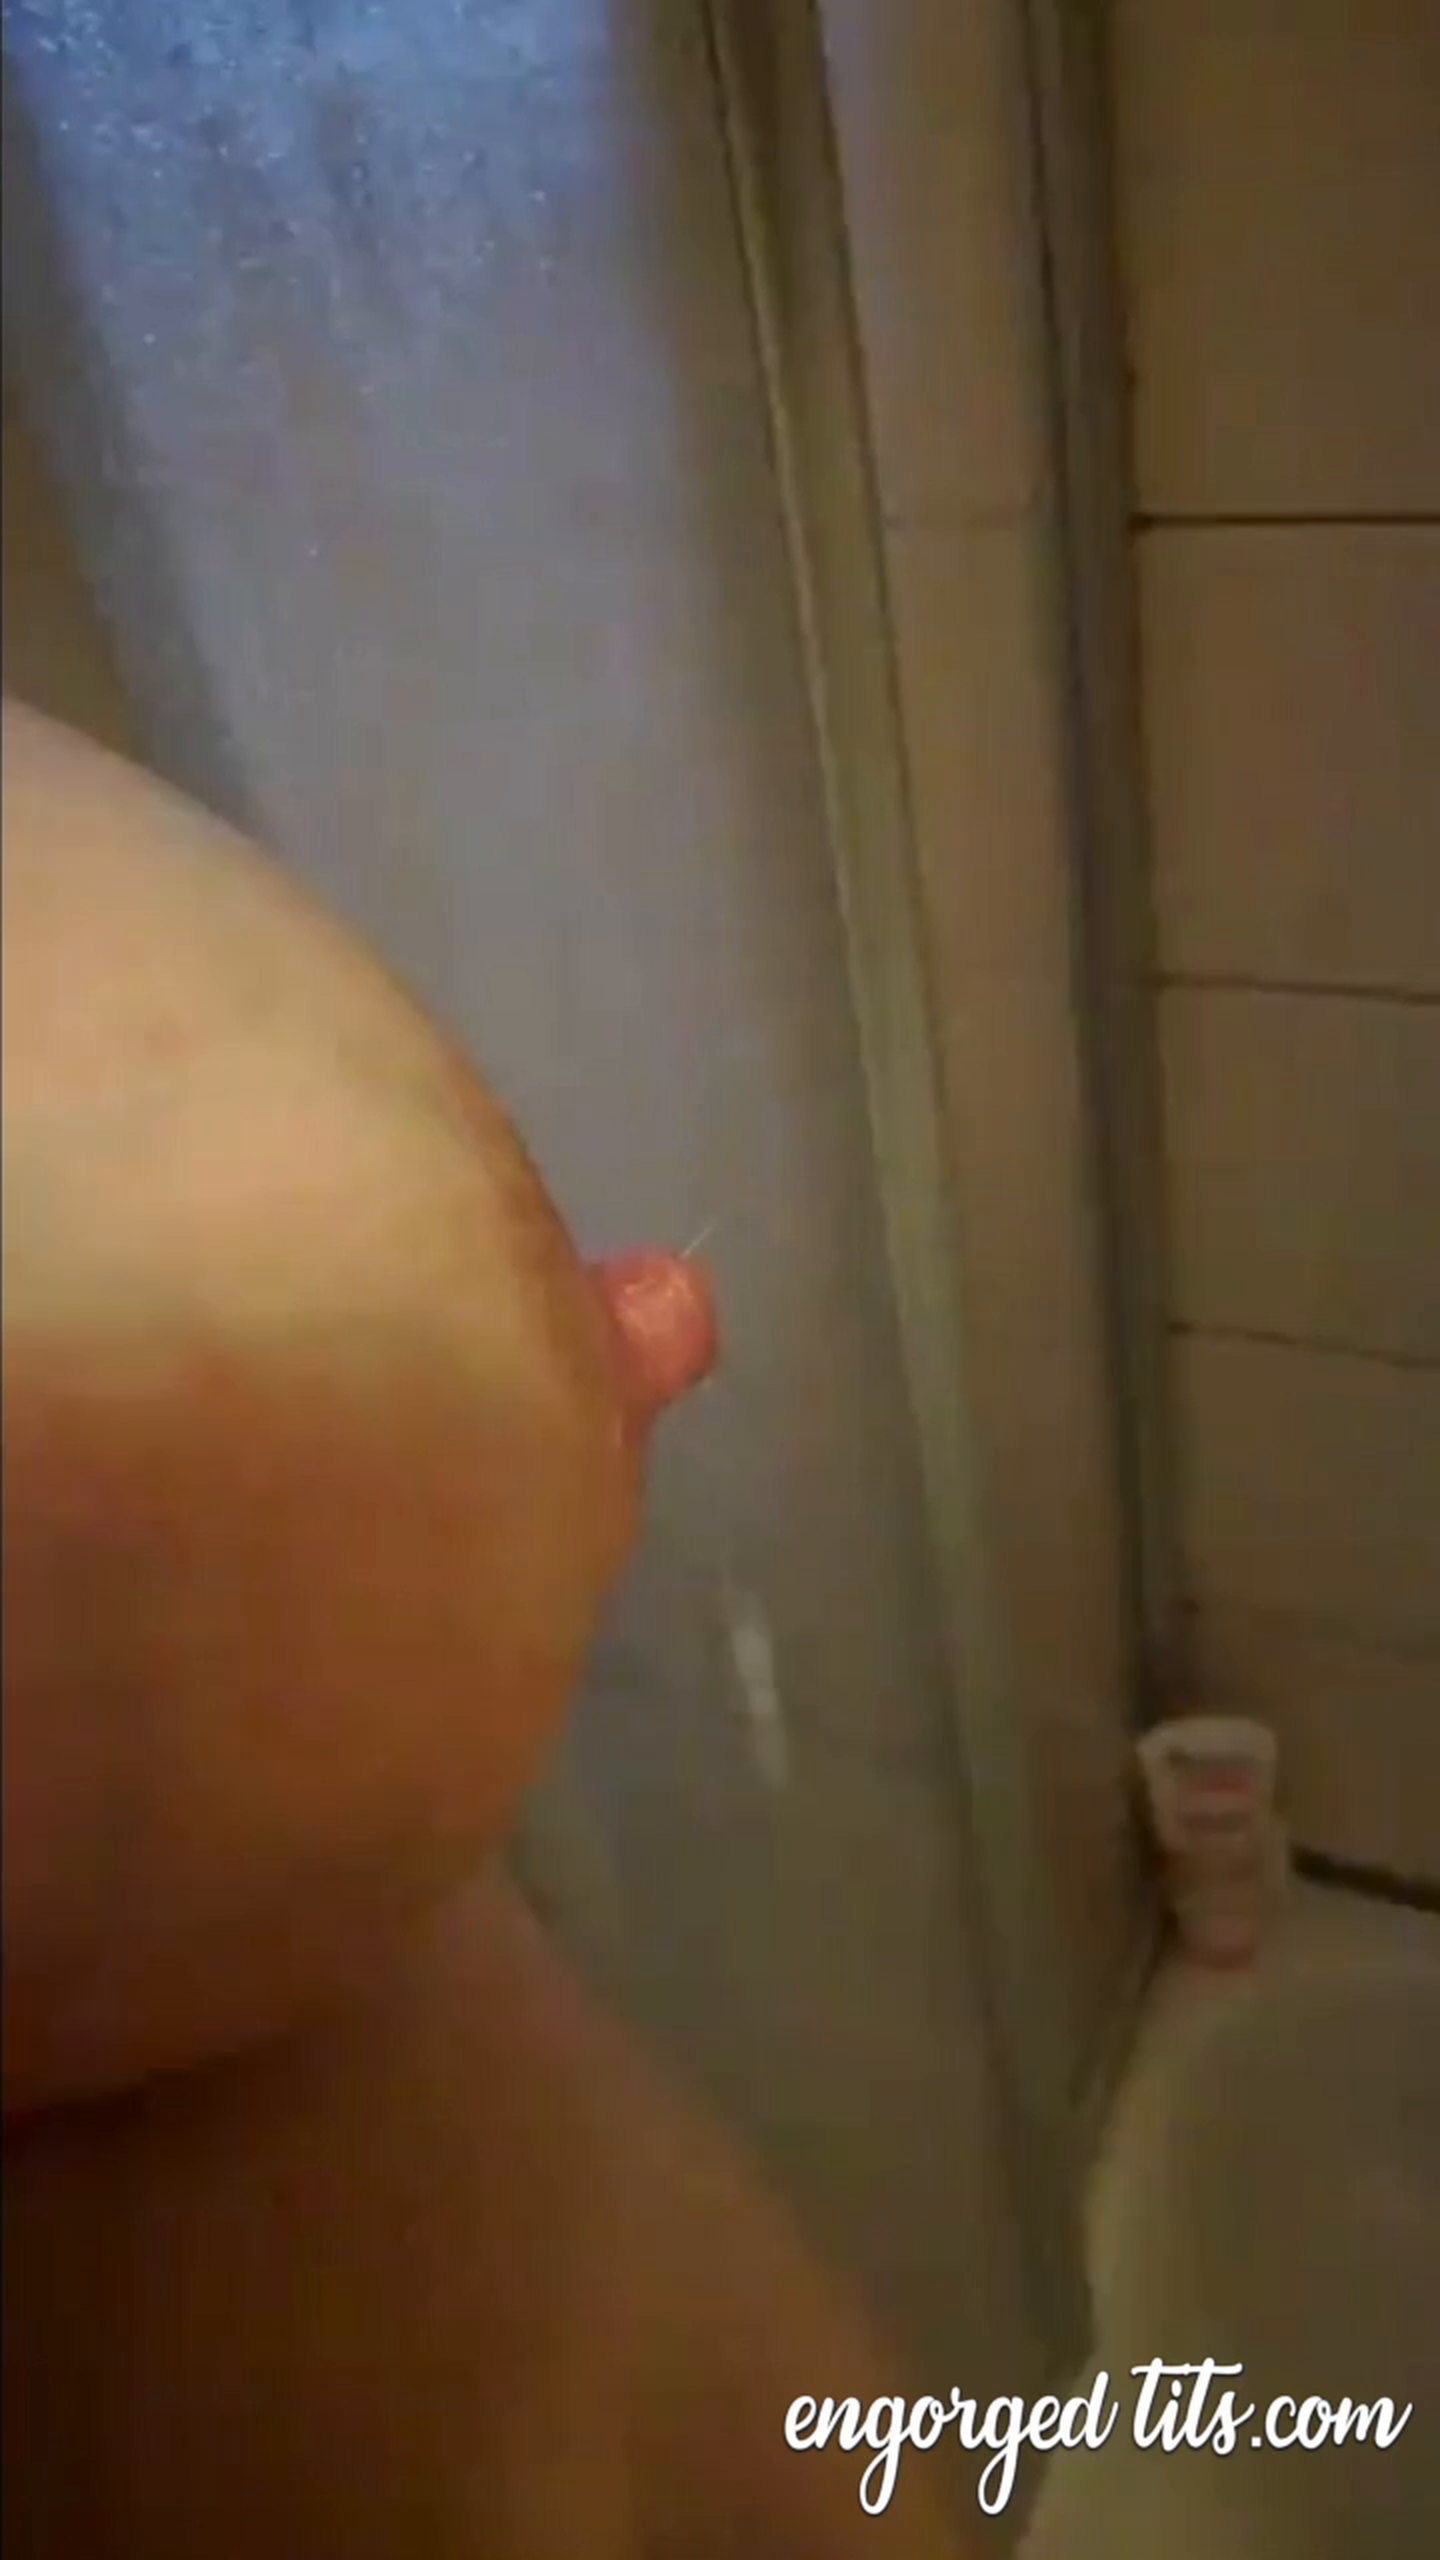 Video by BrunoBang with the username @BrunoBang,  June 2, 2020 at 7:56 AM. The post is about the topic Lactation and the text says 'Big veiny boob auto-spray in bathroom. More lactating videos (100% free) right here >> engorgedtits.com #lactation #lactating #milkytits #lactationfantasy #lactophilia #adultbreastfeeding #darkareolas #nursingbra'